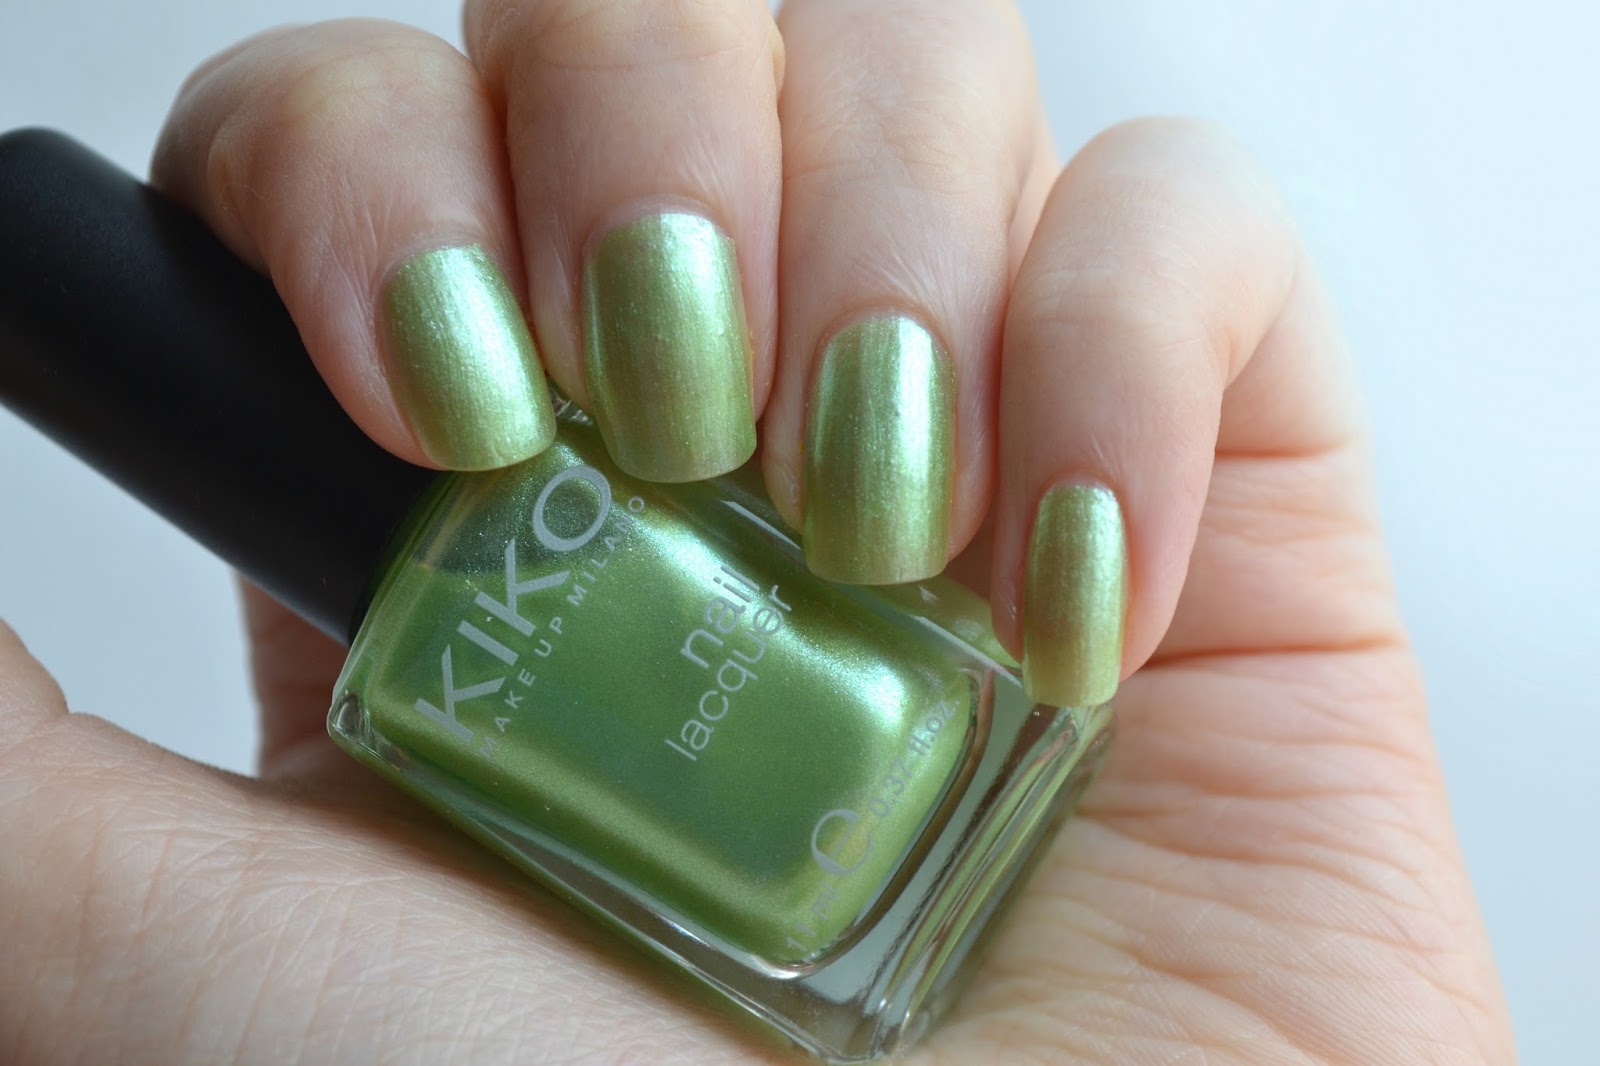 6. Orly Nail Lacquer in "Glowstick" - wide 6